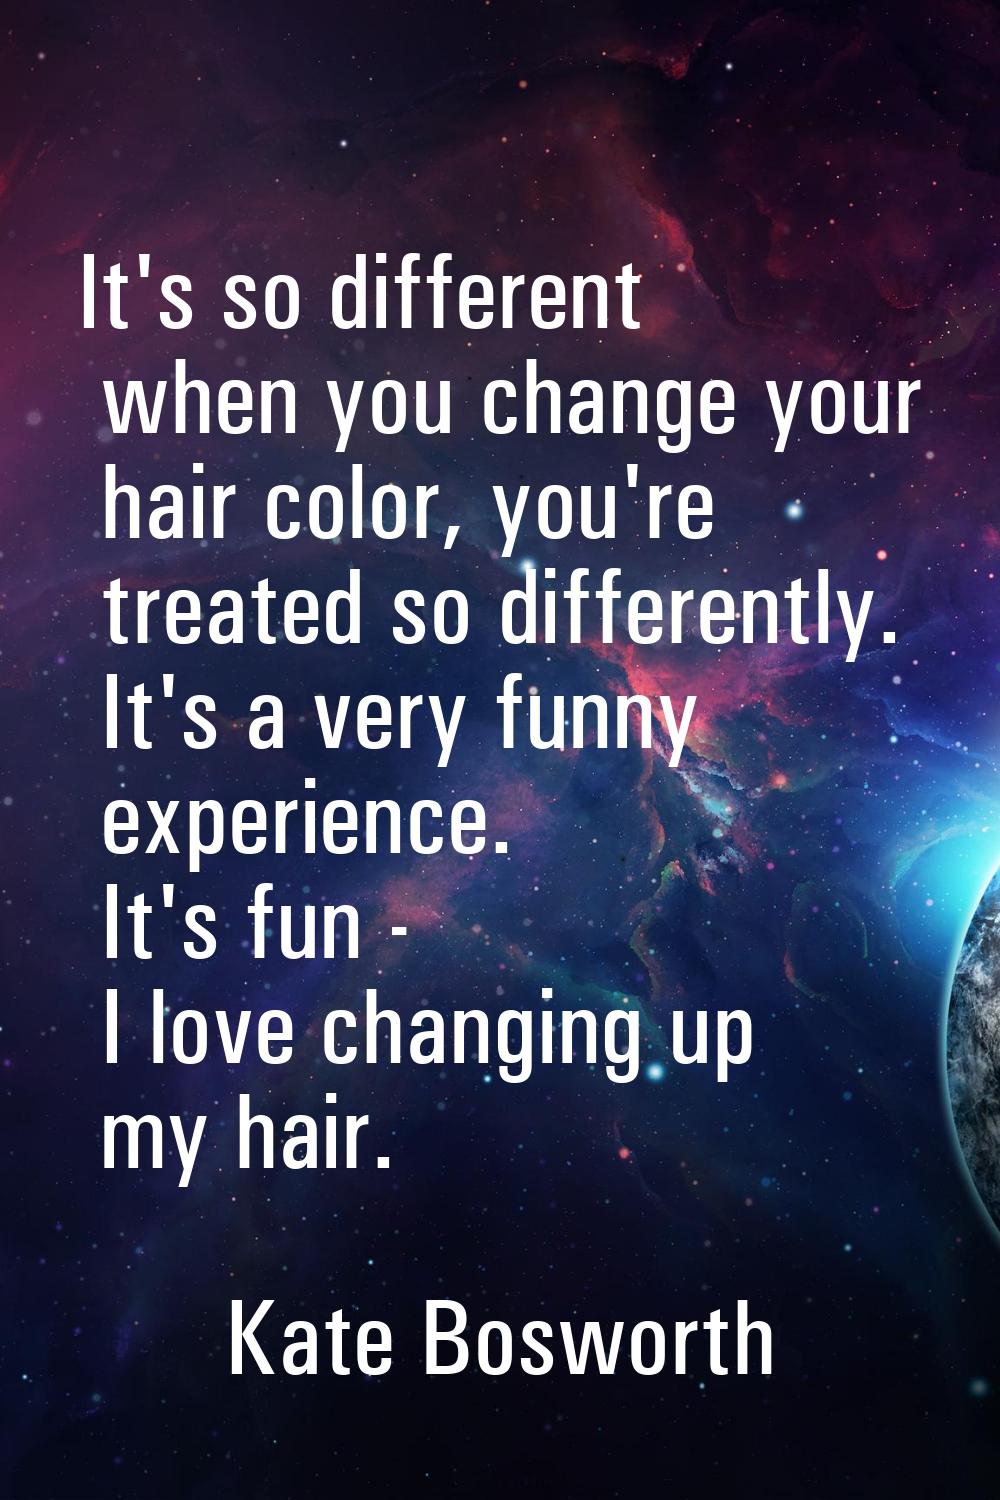 It's so different when you change your hair color, you're treated so differently. It's a very funny